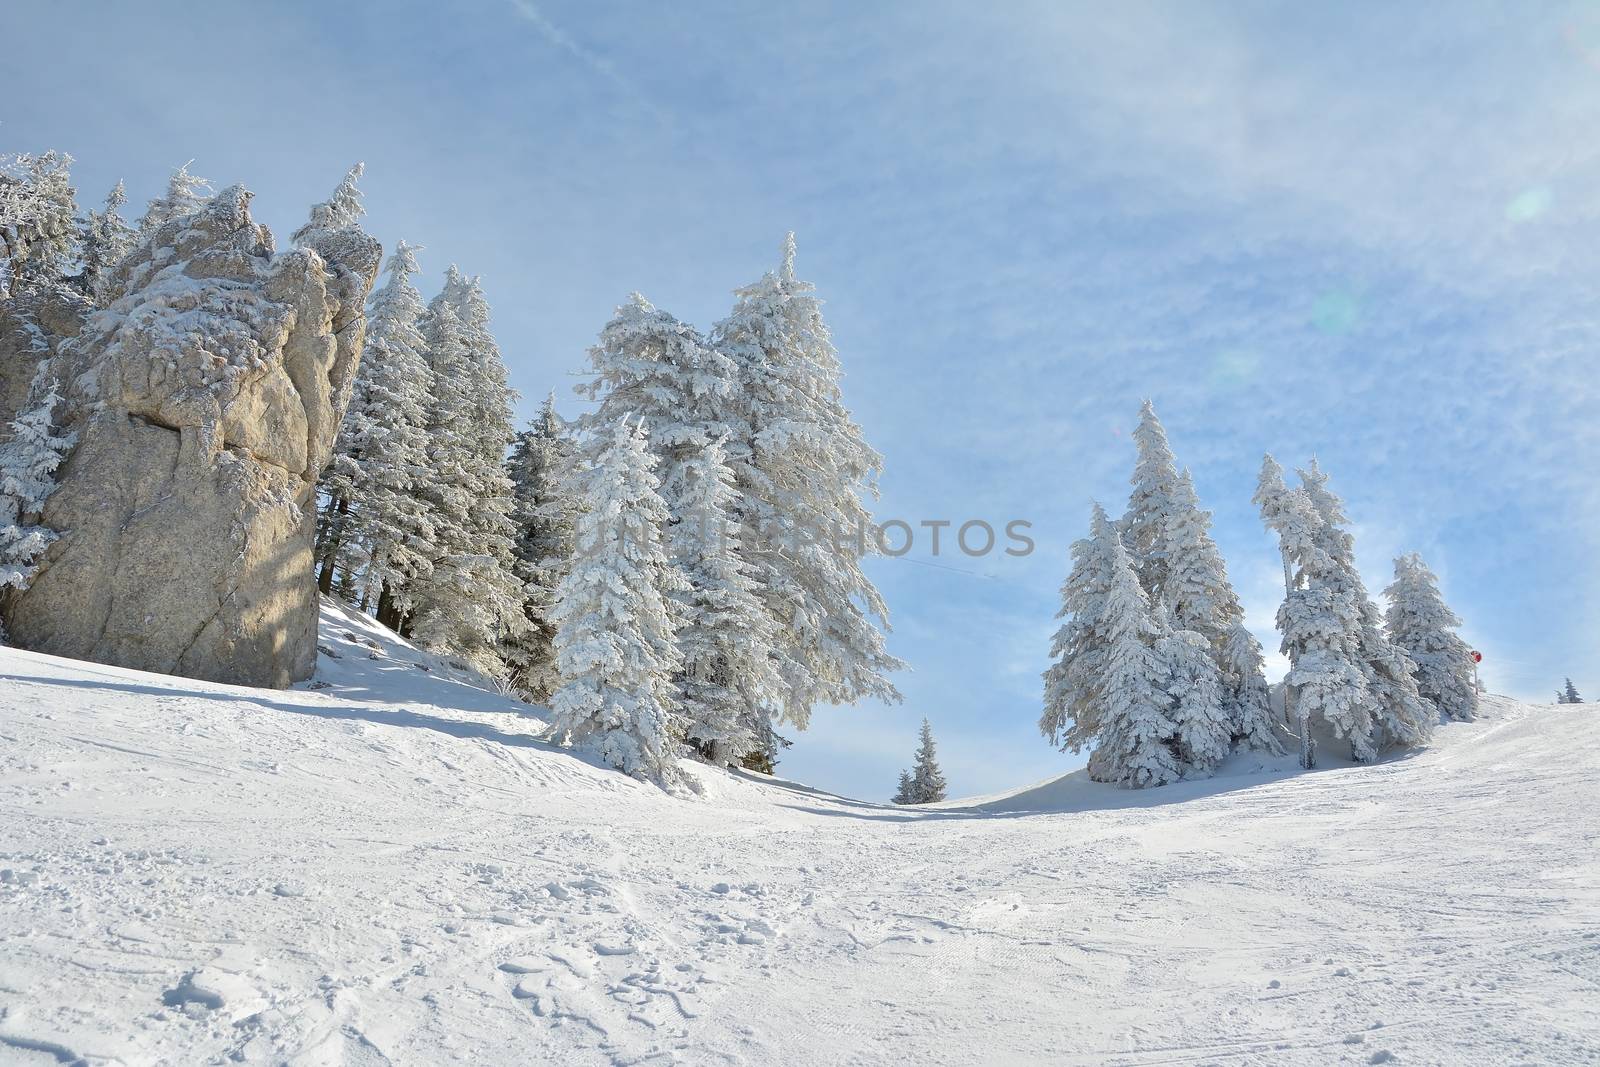 Ski slope and snow covered trees